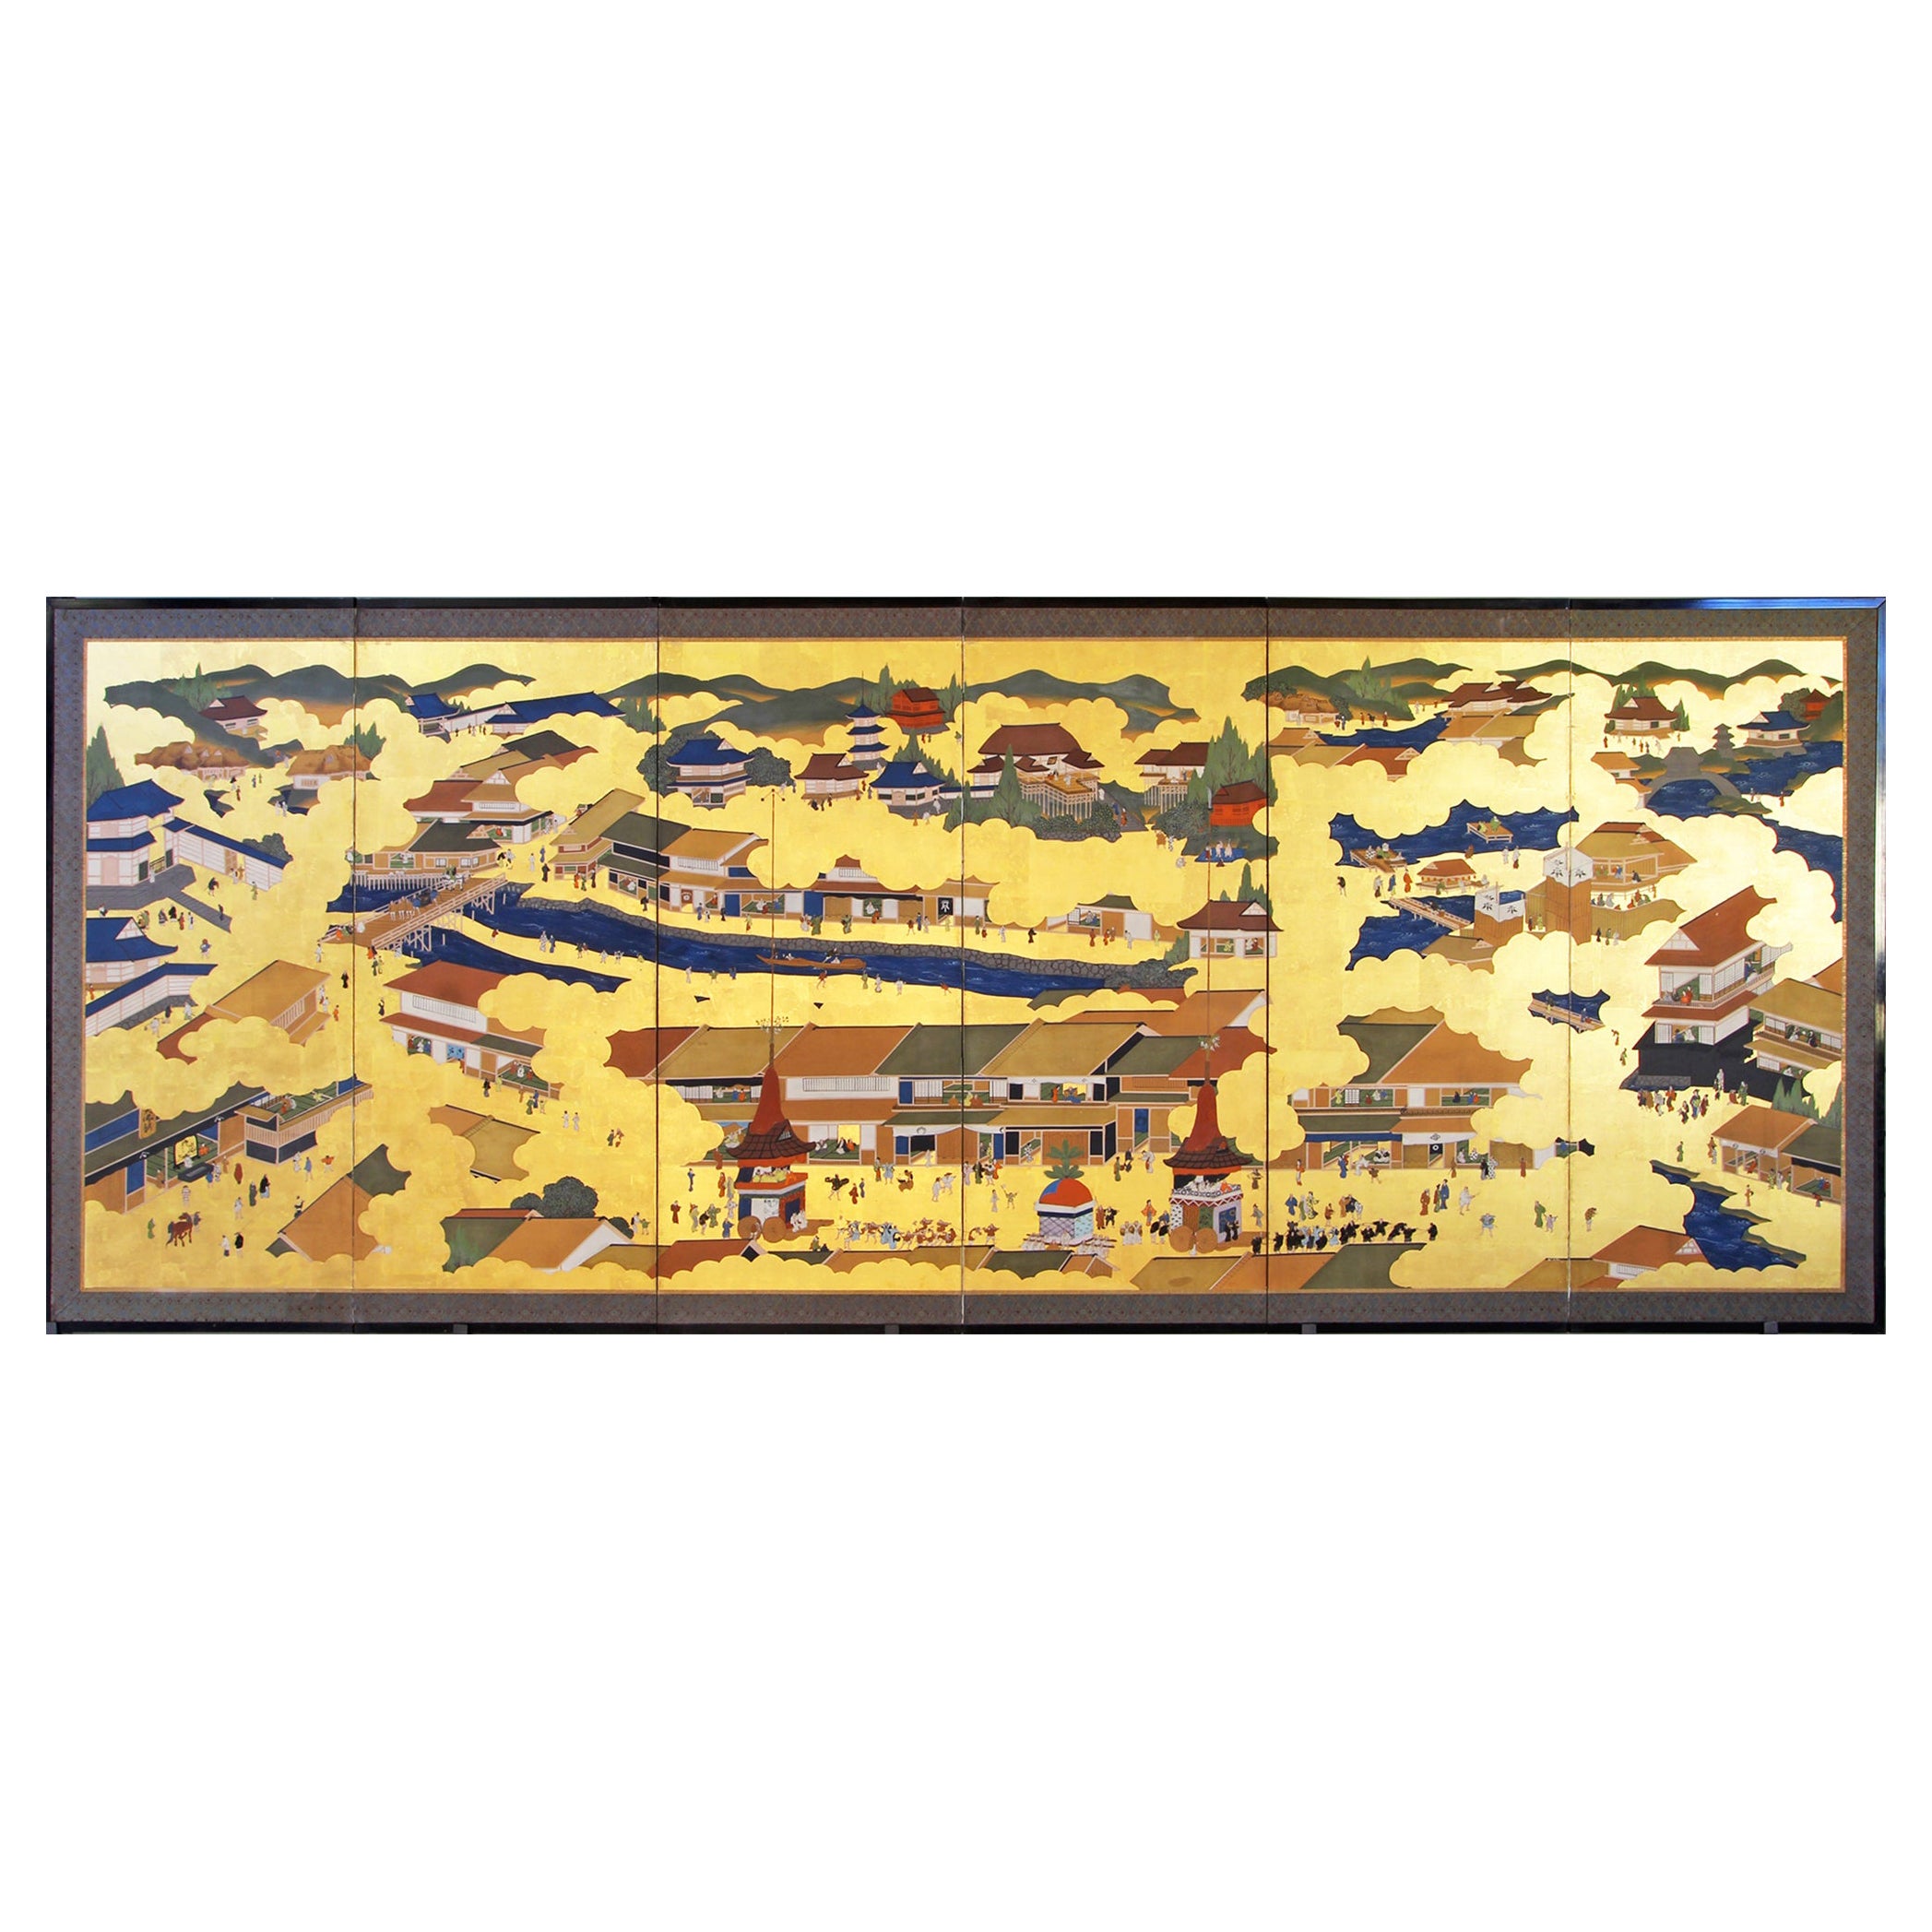 Kyoto Landscape, Japanese Screen Painted on Gold Leaf